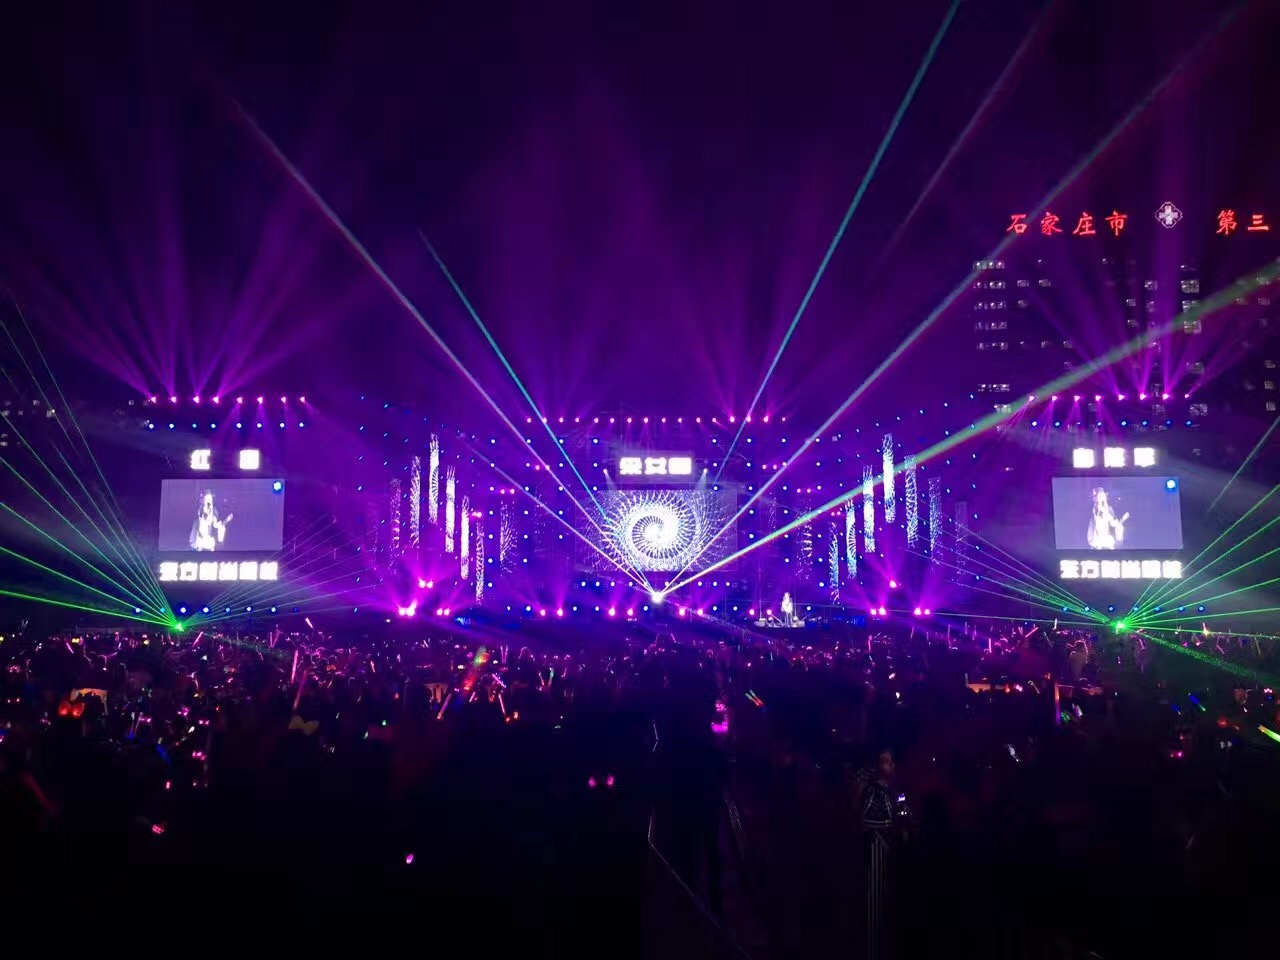 Sapphire Touch controls 'Super Stars Concert' in Shijiazhuang, China